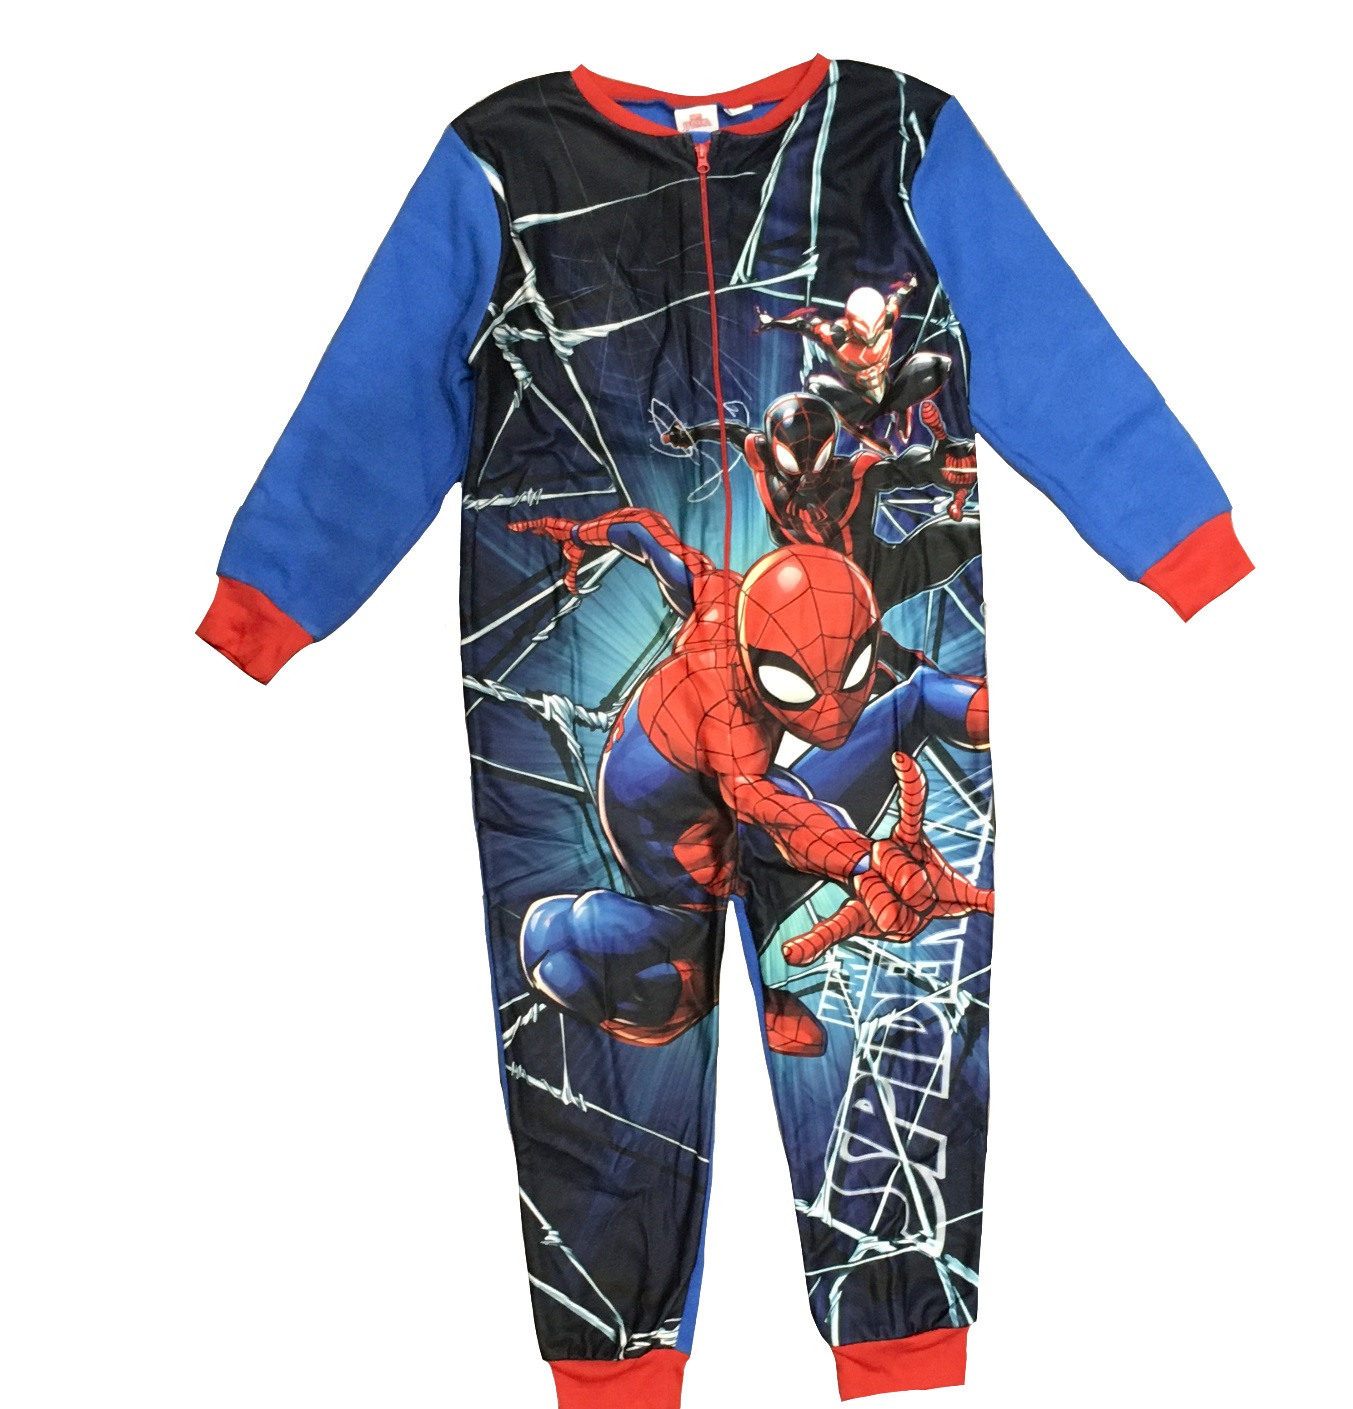 Boys Spiderman Fleece Onesie Age 18 months - 10 Years - Kids With Character